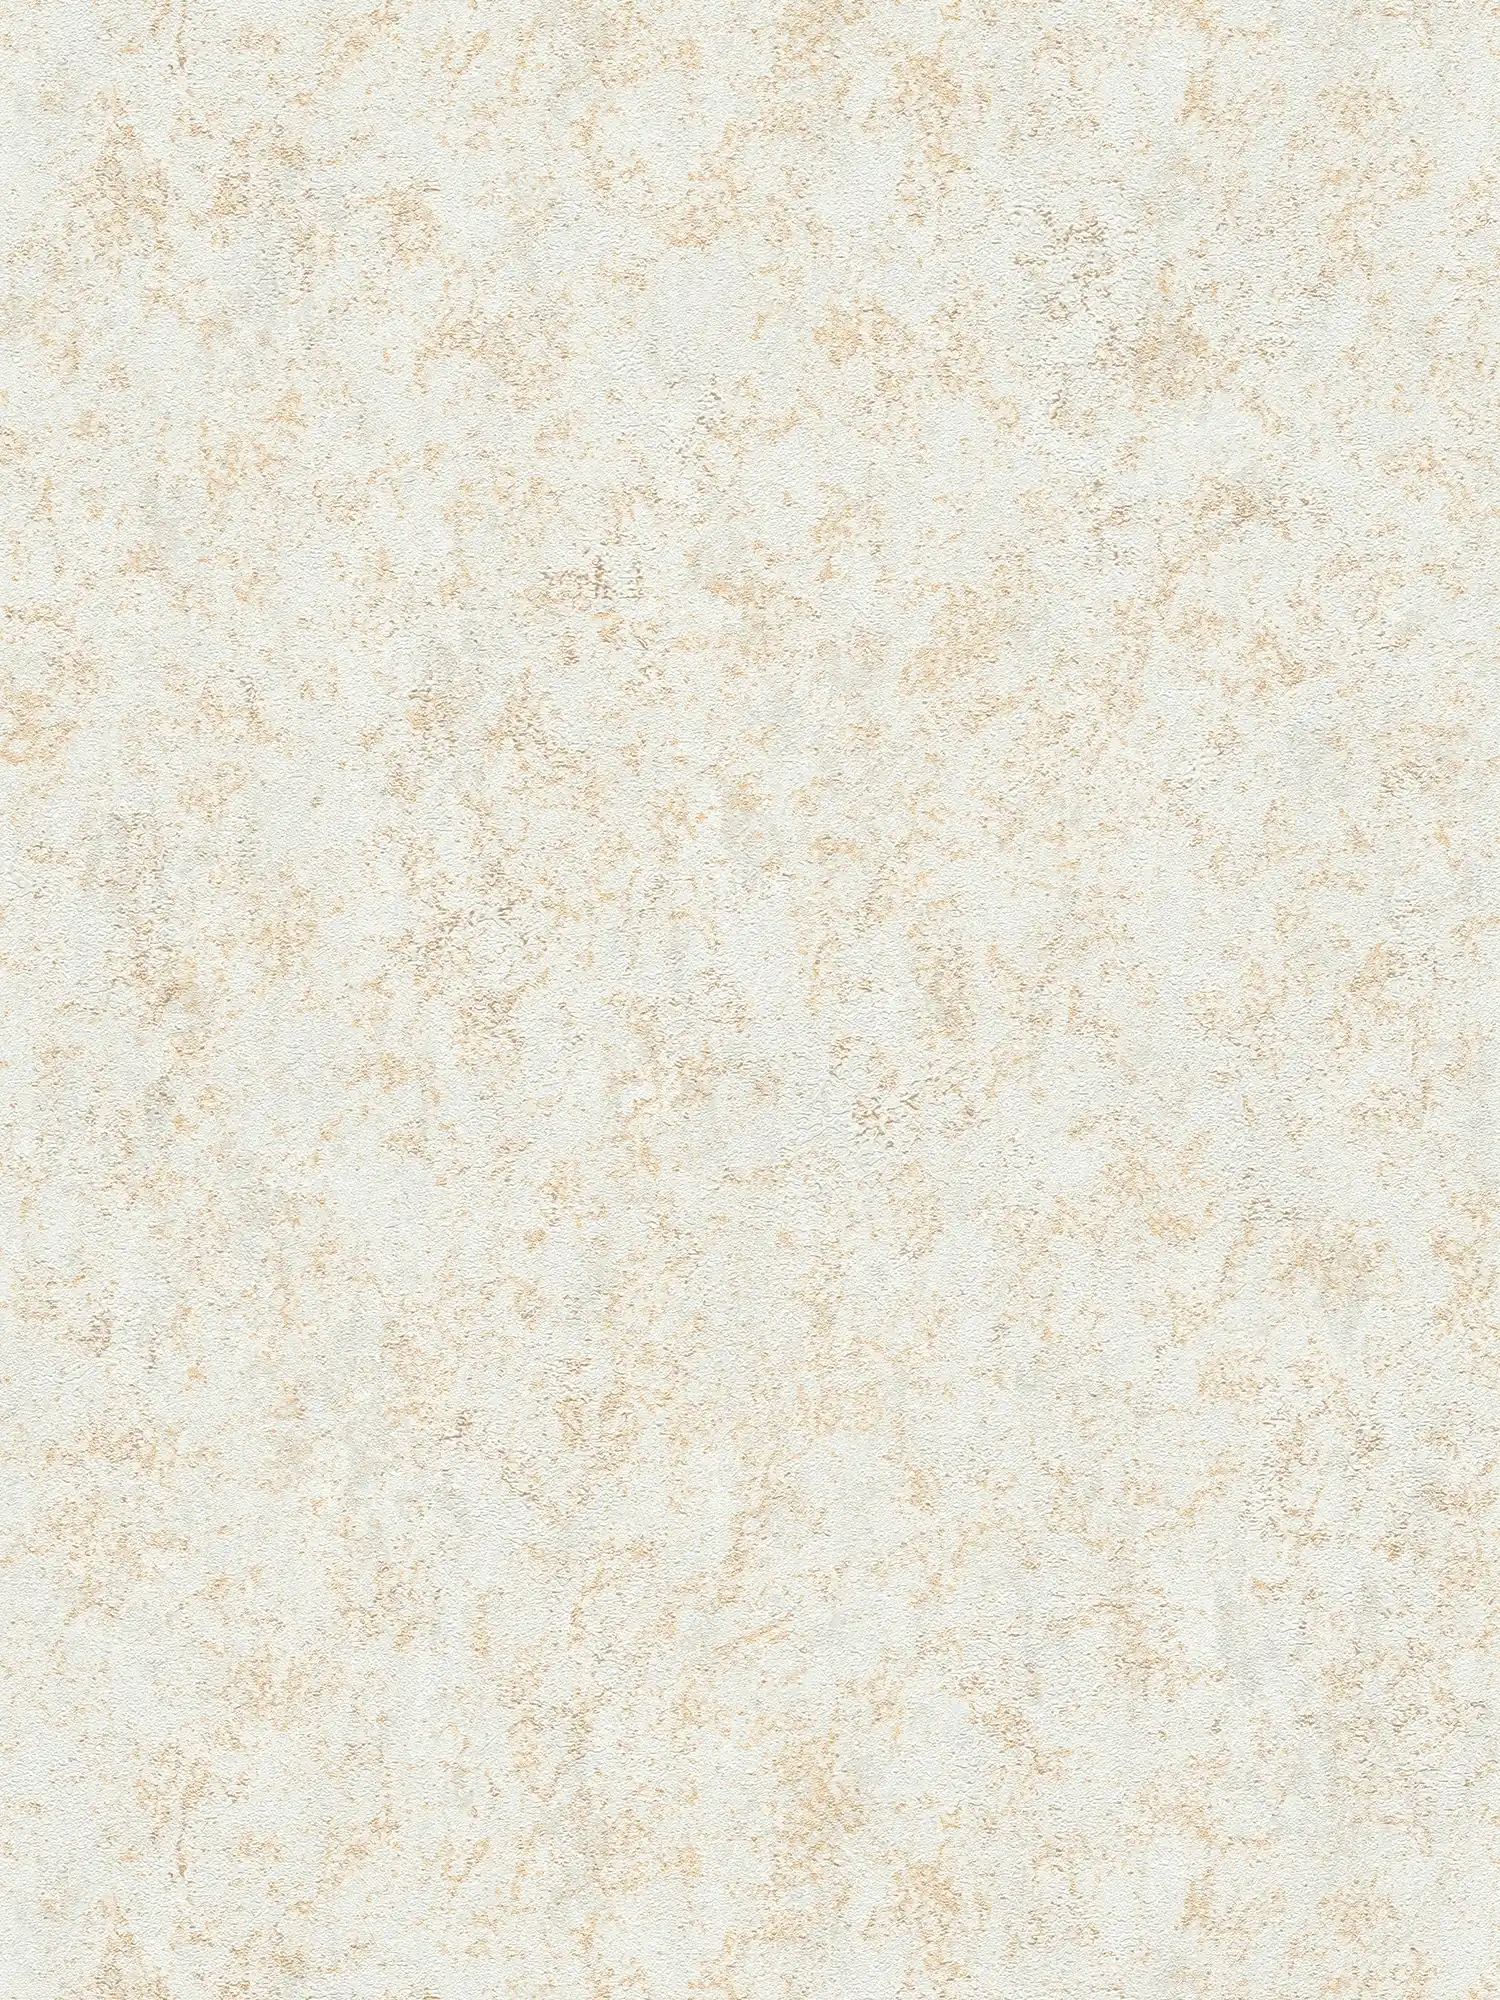 Plain textured wallpaper with metallic effect glossy - gold, light grey, white
